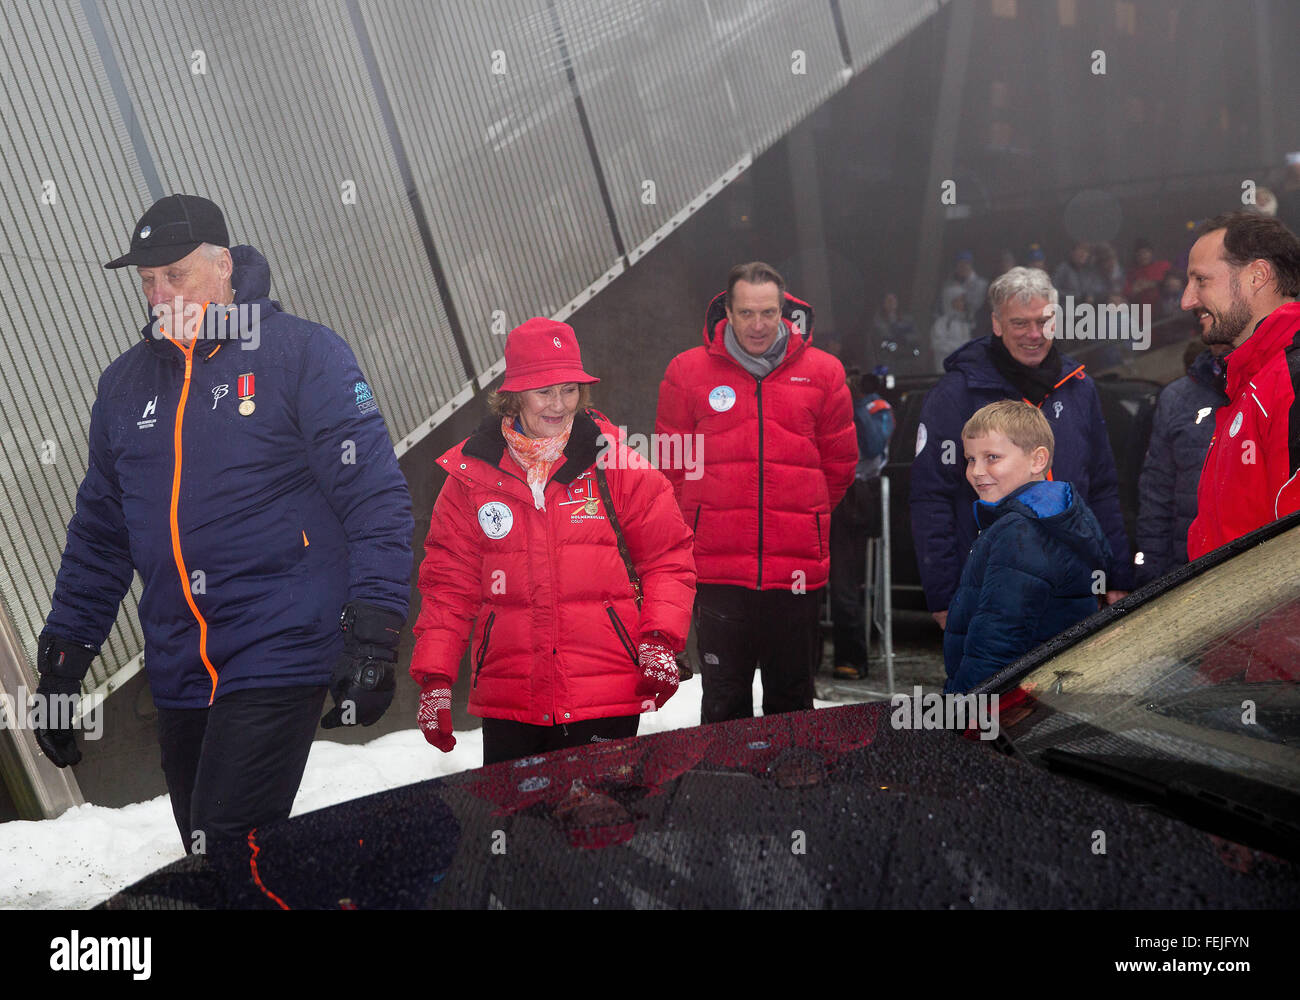 Oslo, 07-02-2016 King Harald, Queen Sonja, Crown Prince Haakon and Prince Sverre Magnus Members of the Norwegian Royal Family attend the Holmenkollen FIS World Cup Nordic RPE/Albert Nieboer/Netherlands OUT - NO WIRE SERVICE - Stock Photo